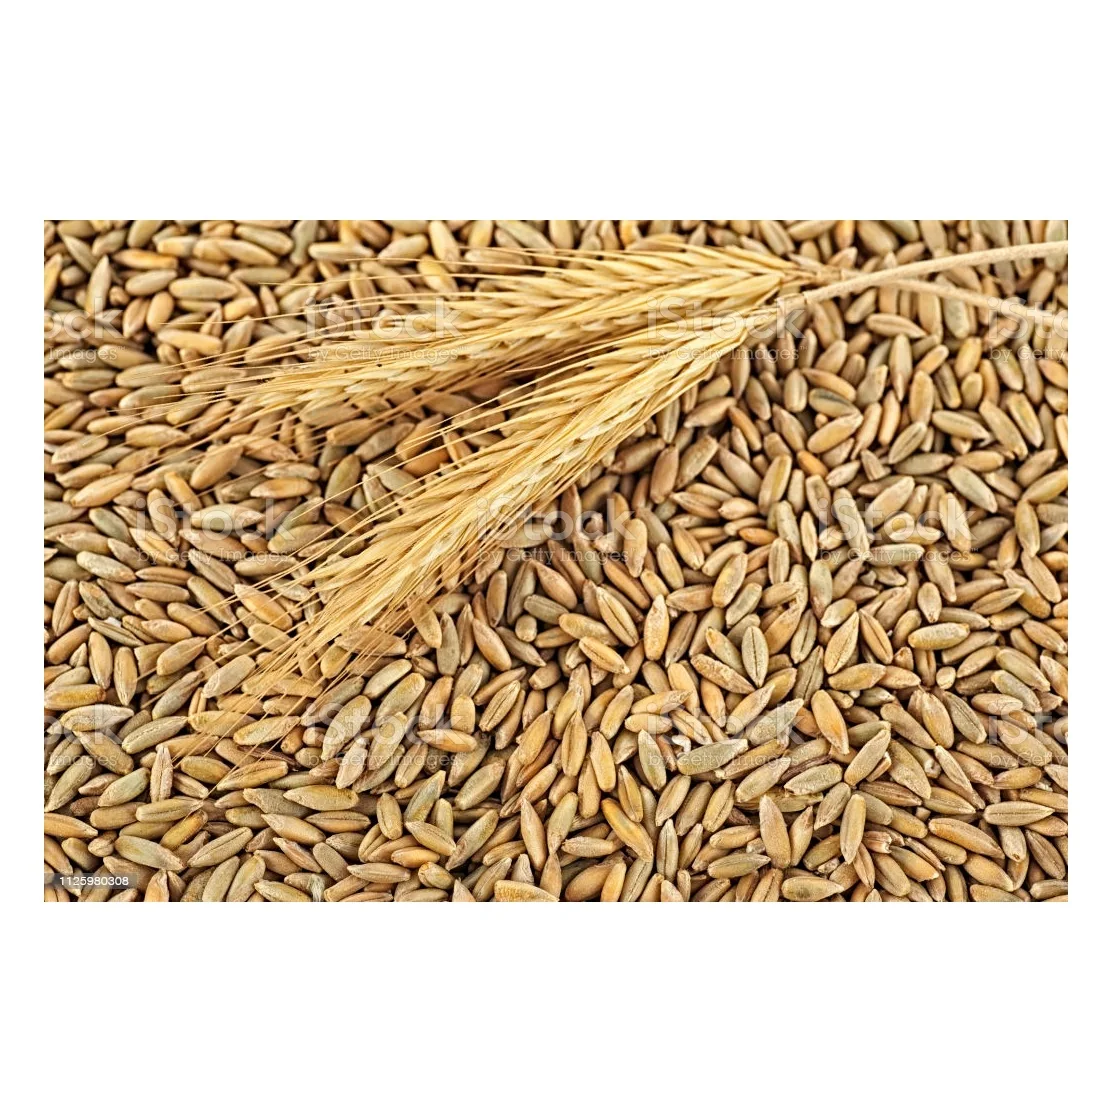 Hot Selling Price Of Rye Grains Available in Bulk Quantity